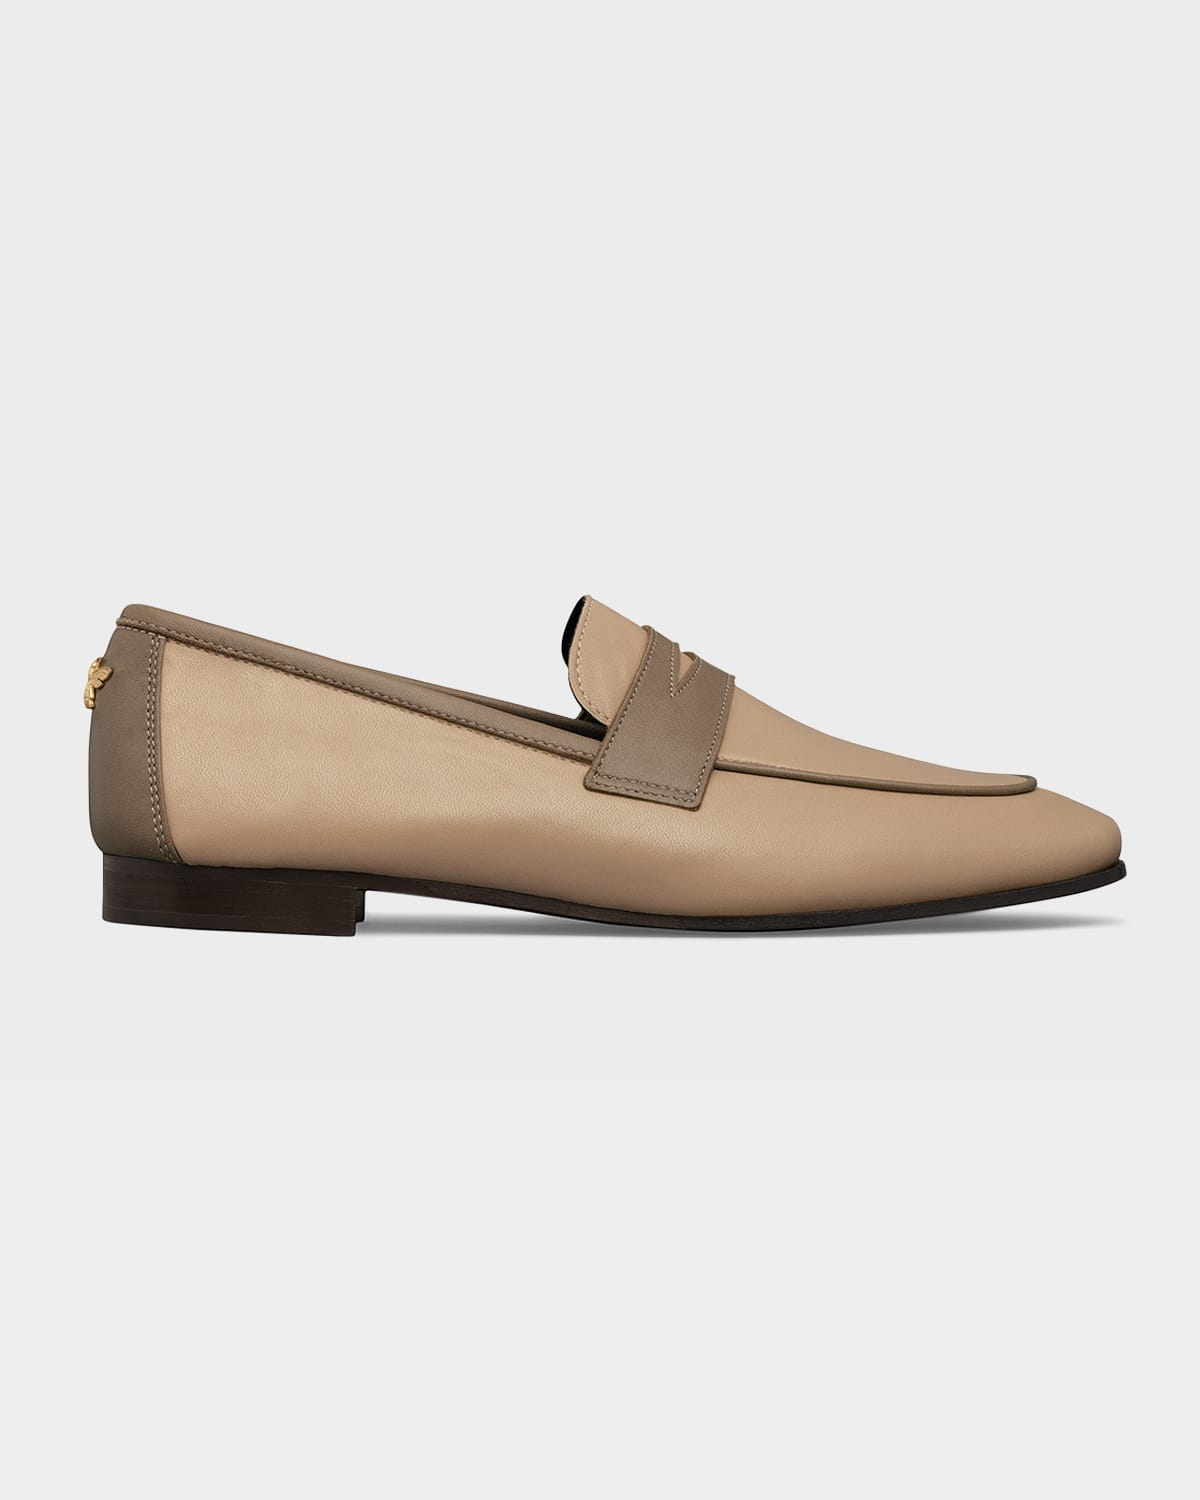 Bougeotte Bicolor Calfskin Penny Loafers